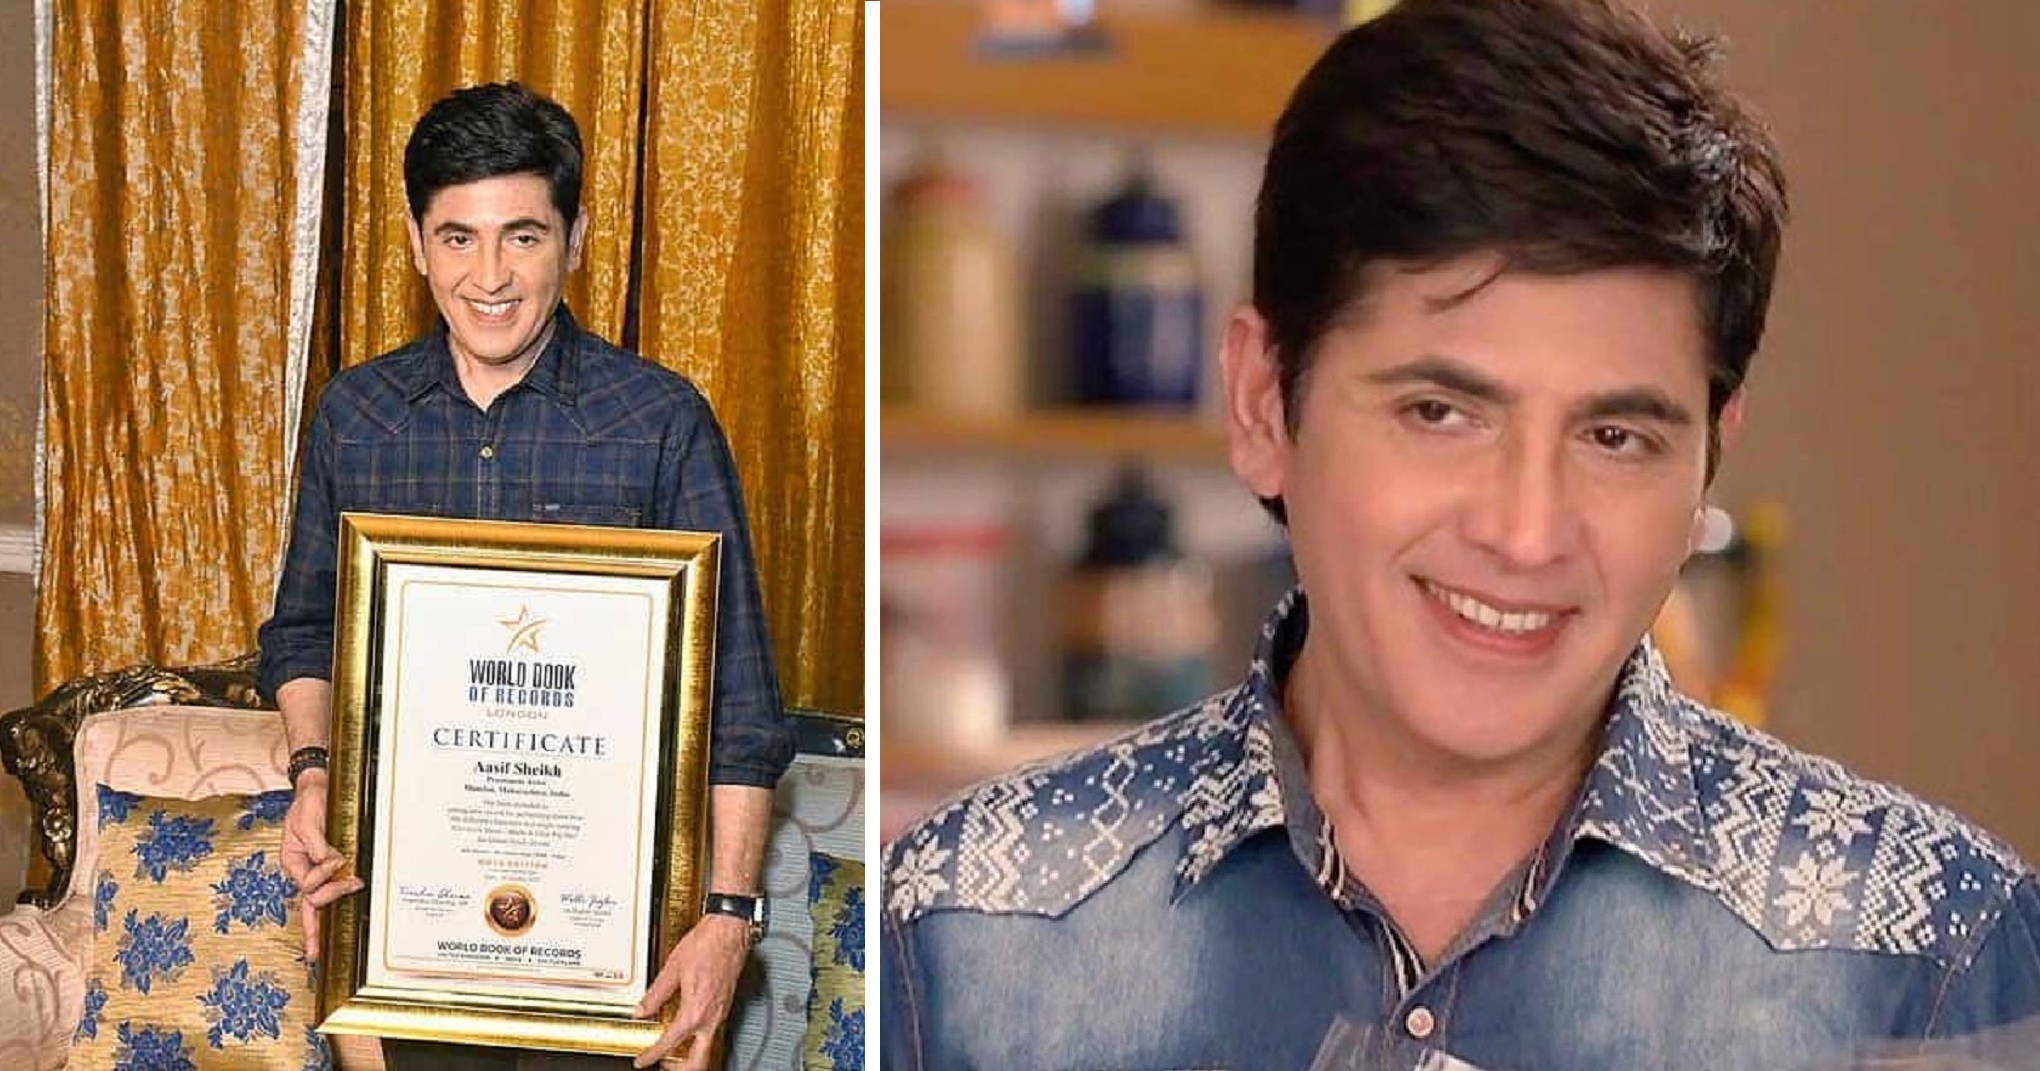 Bhabiji Ghar Par Hain’s Aasif Sheikh Receives Recognition From London For Playing 300 Different Characters In The Show